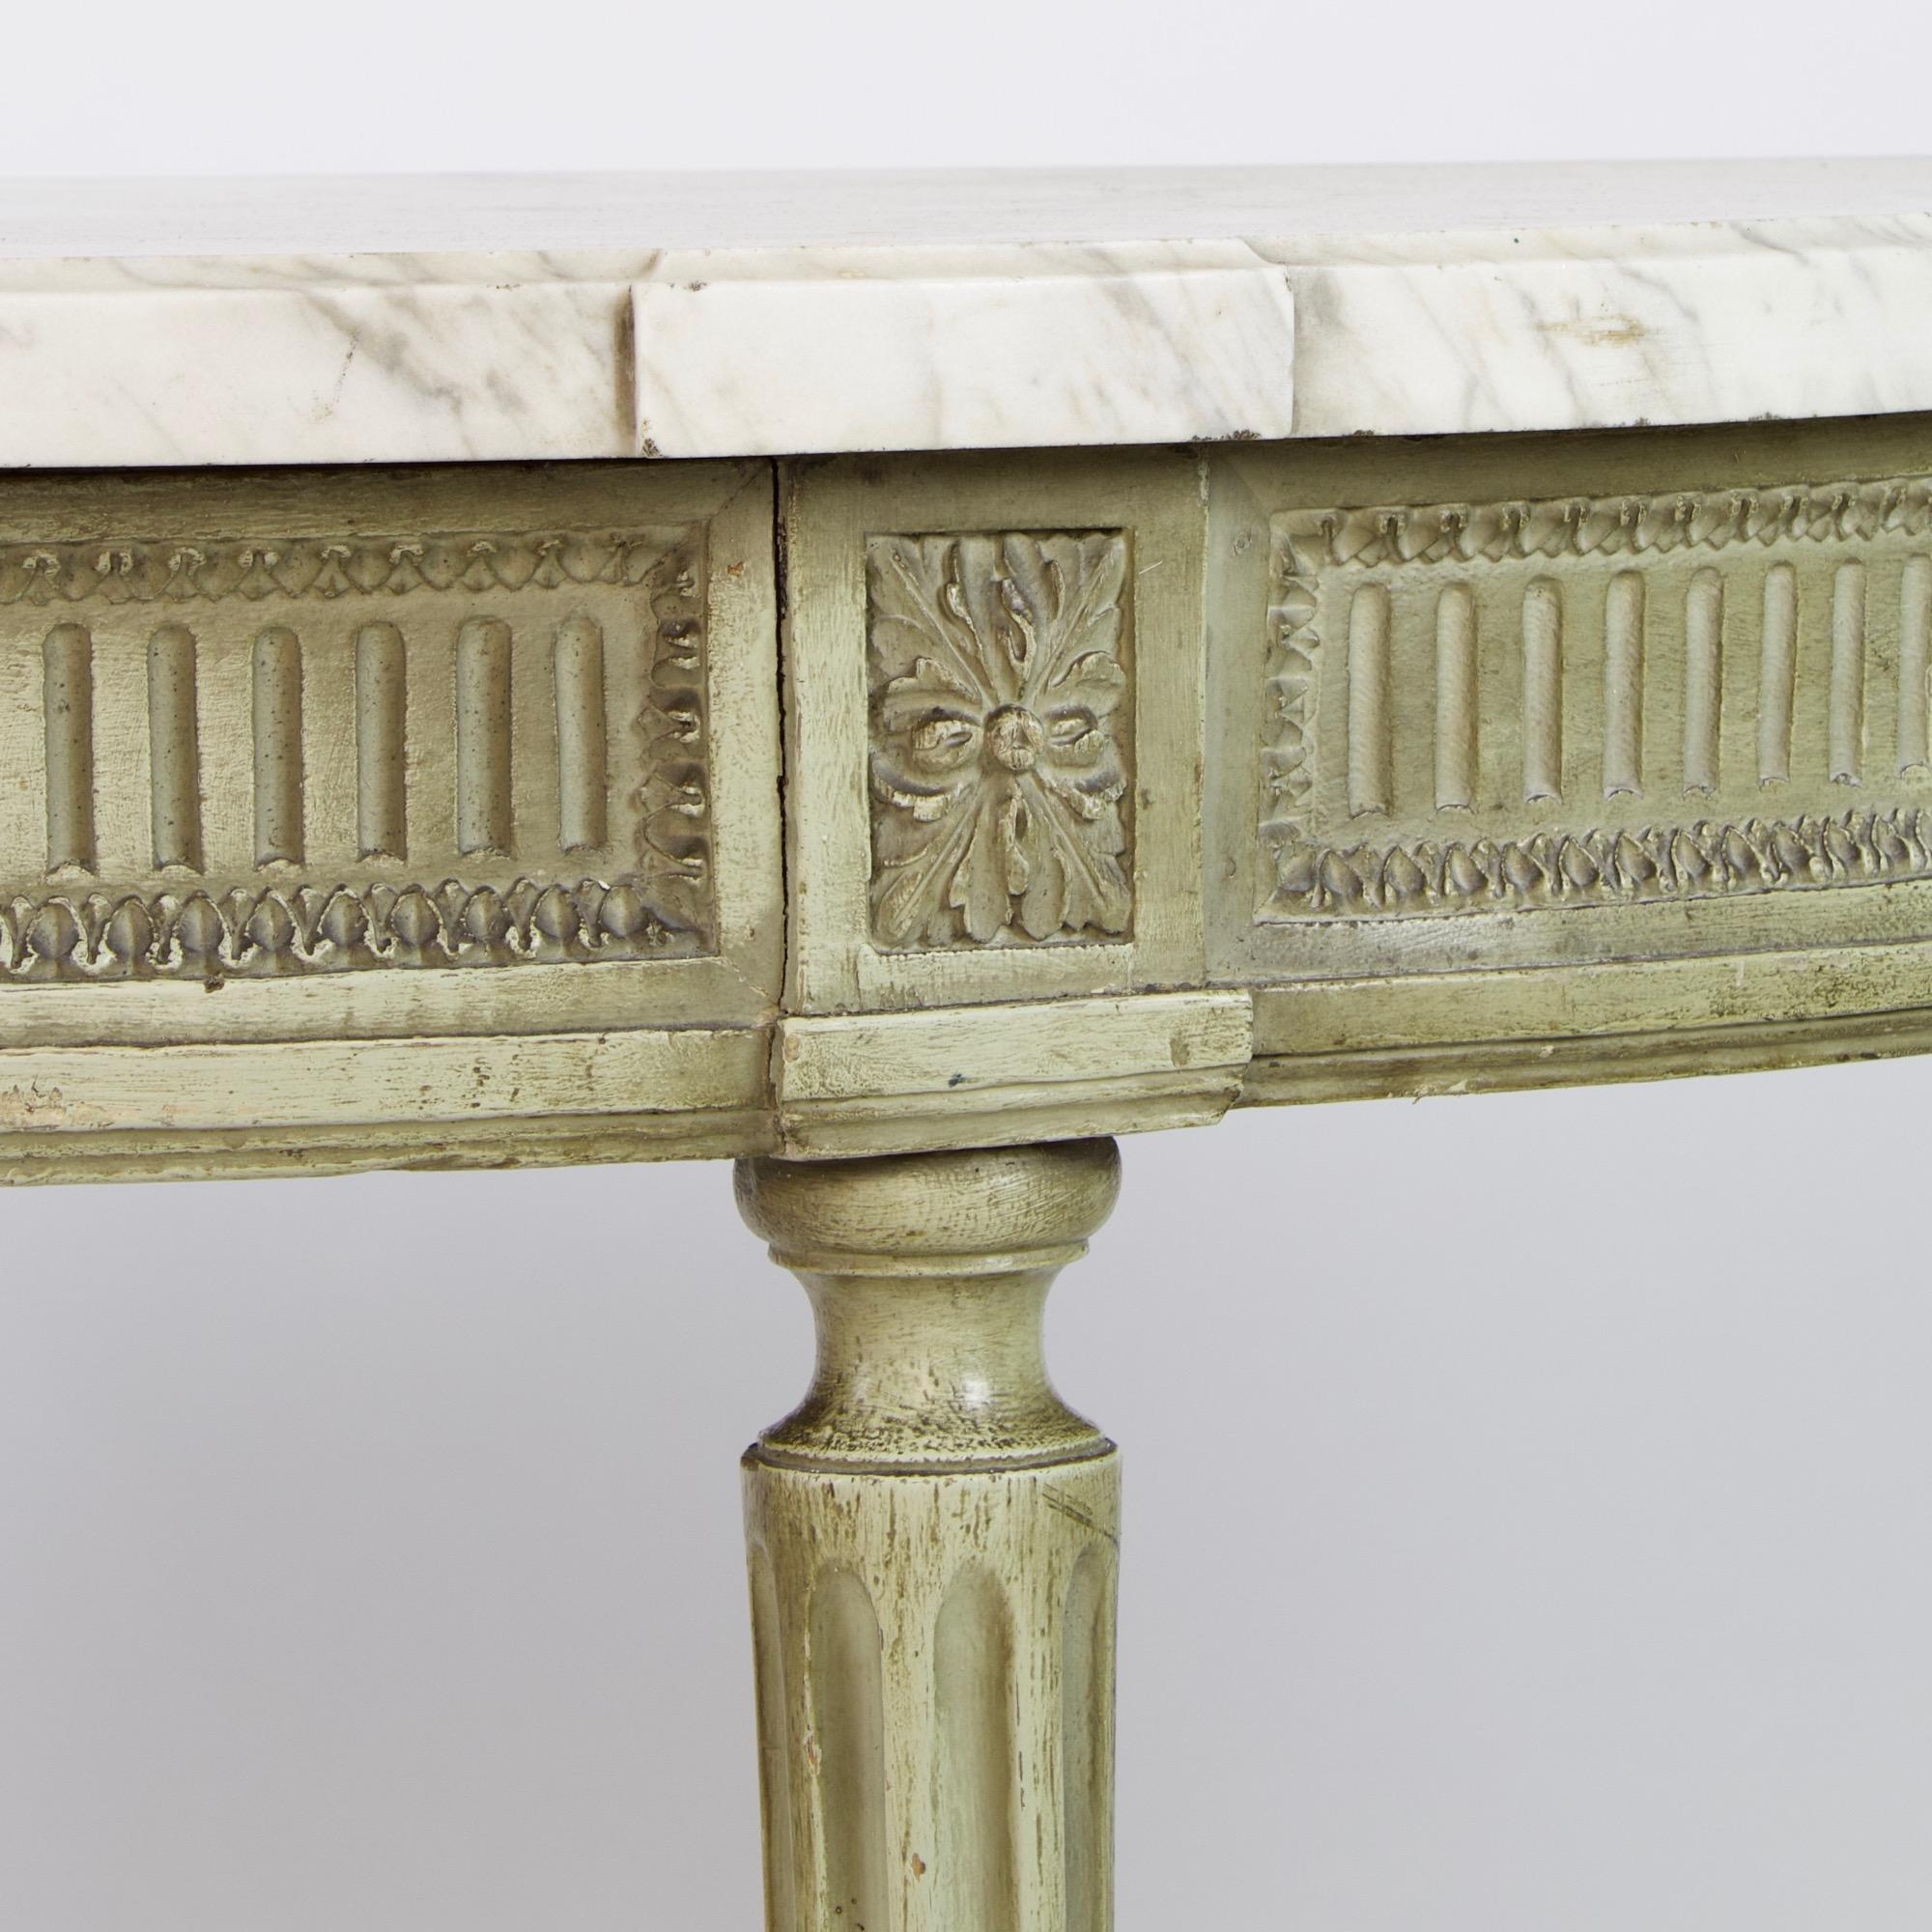 Late 18th century French Louis XVI carved and painted wood demilune console table

The demilune moulded mottled white and grey marble top above a carved frieze with fluting, lesbian kyma and square paterae. Standing on four fluted and tapering